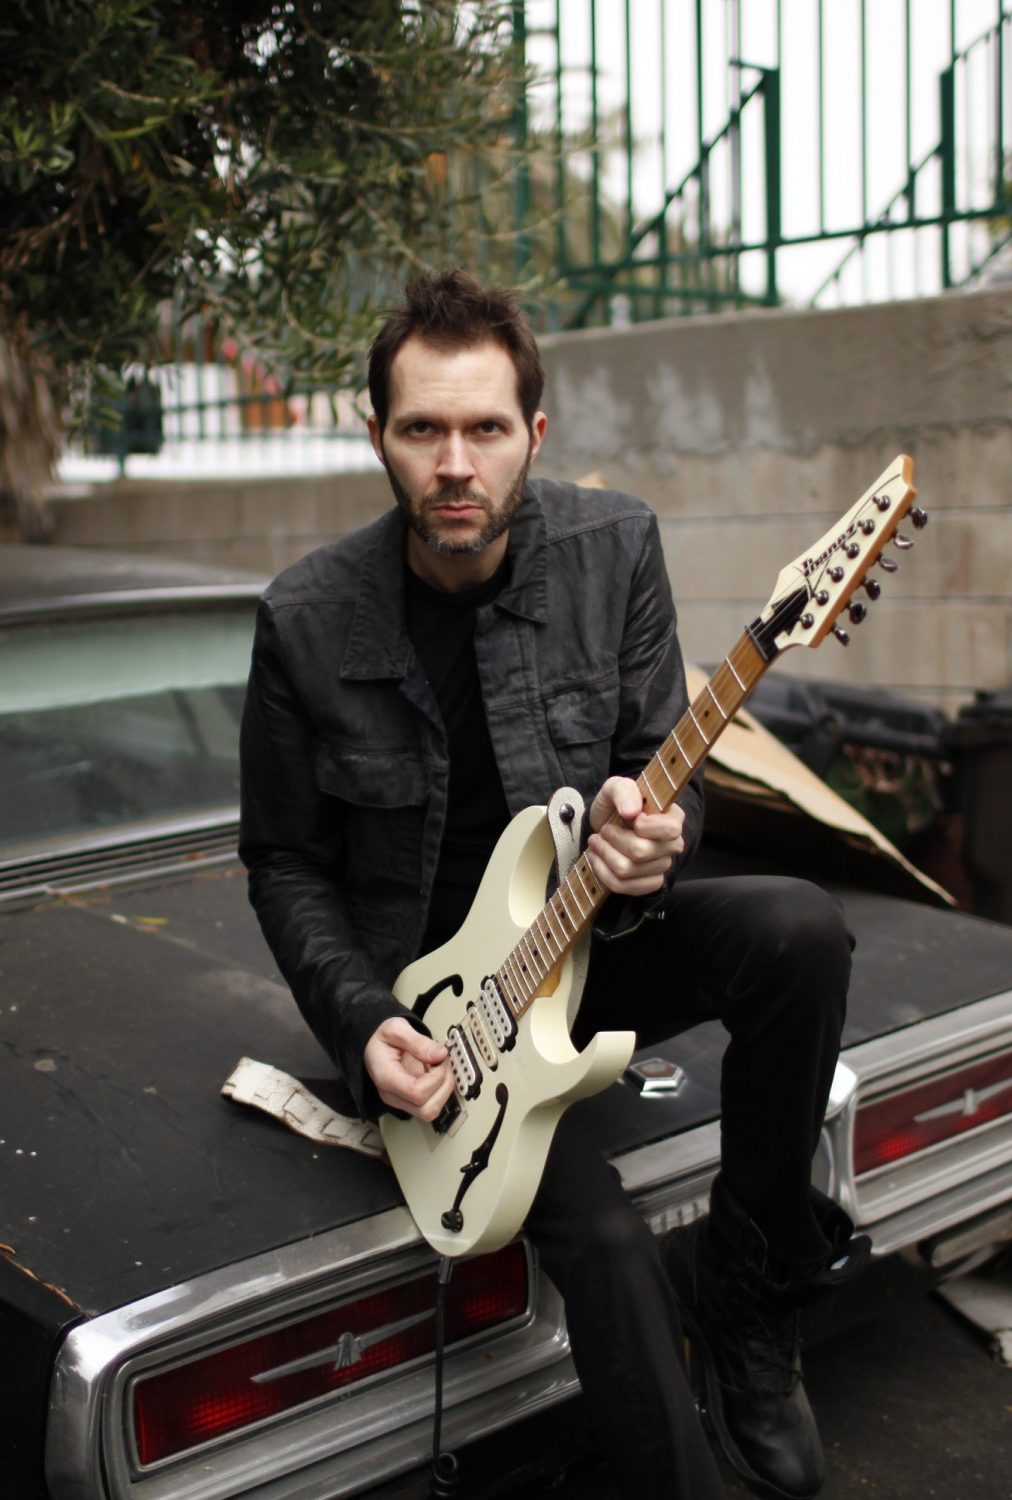 Paul Gilbert on his new album “I Can Destroy,” his Great Guitar Escape 3.0, New York City, and more